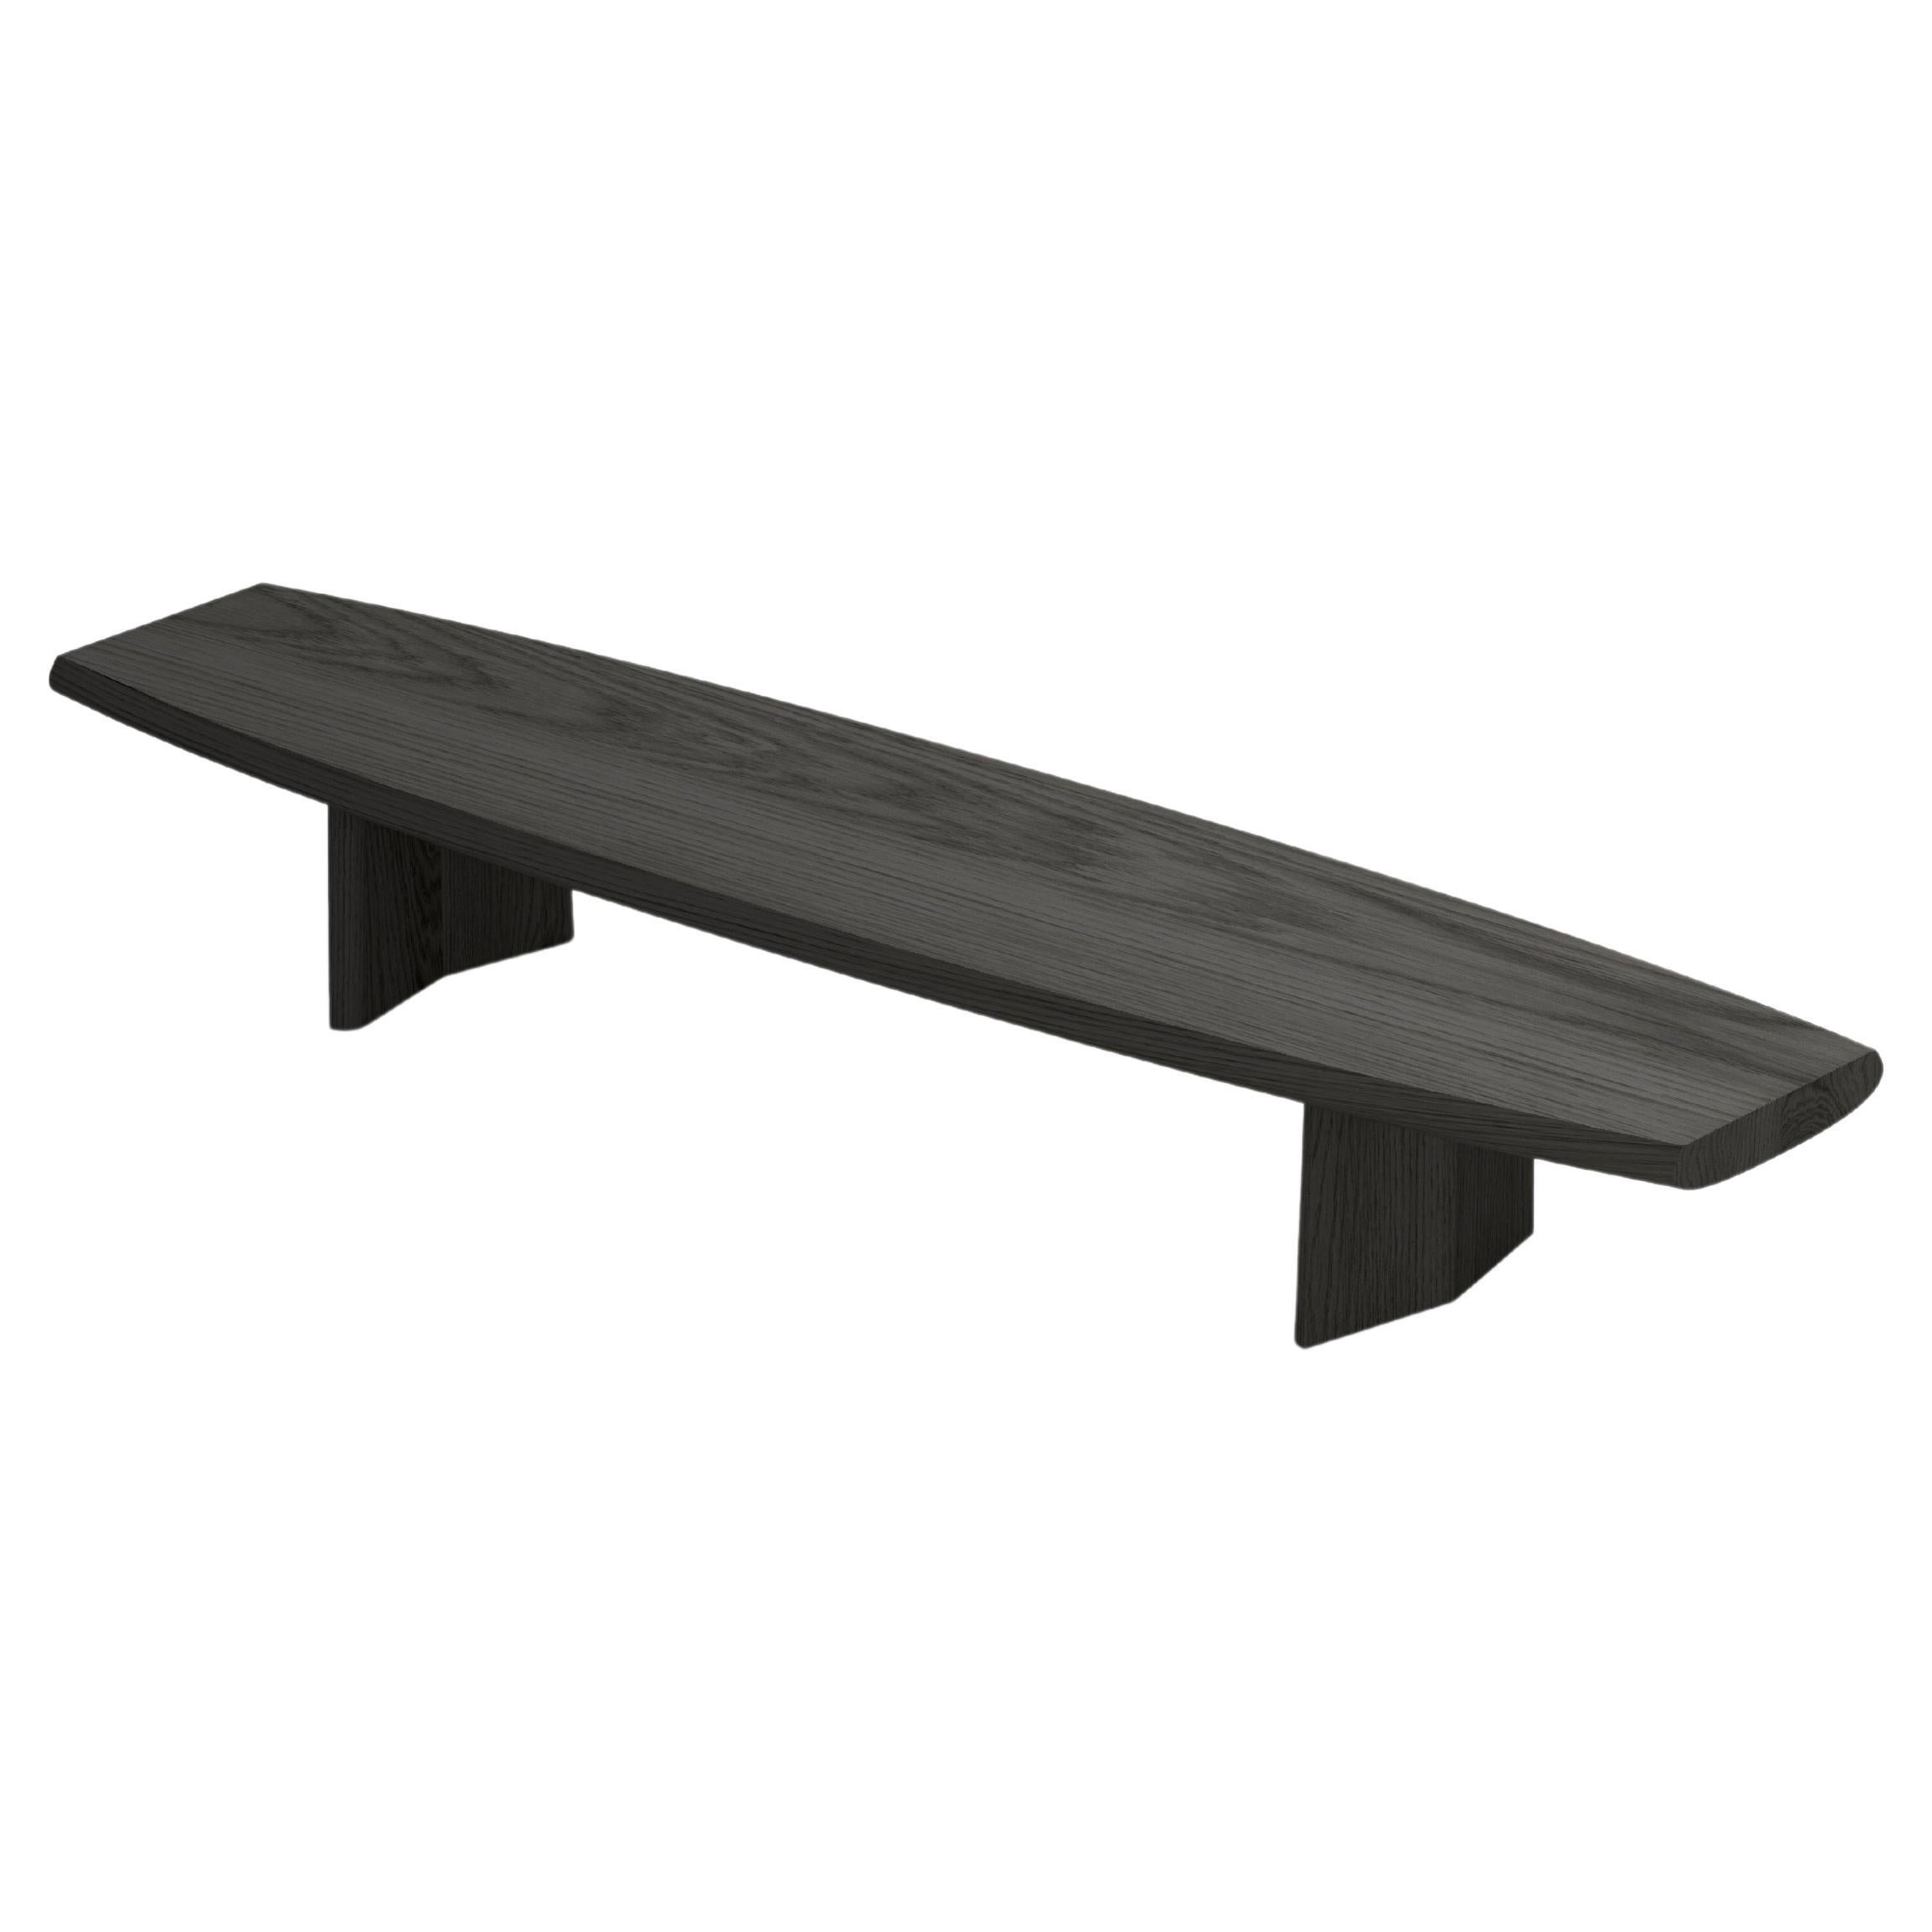 Peana Low Coffee Table, Bench in Black Tinted Wood Finish by Joel Escalona